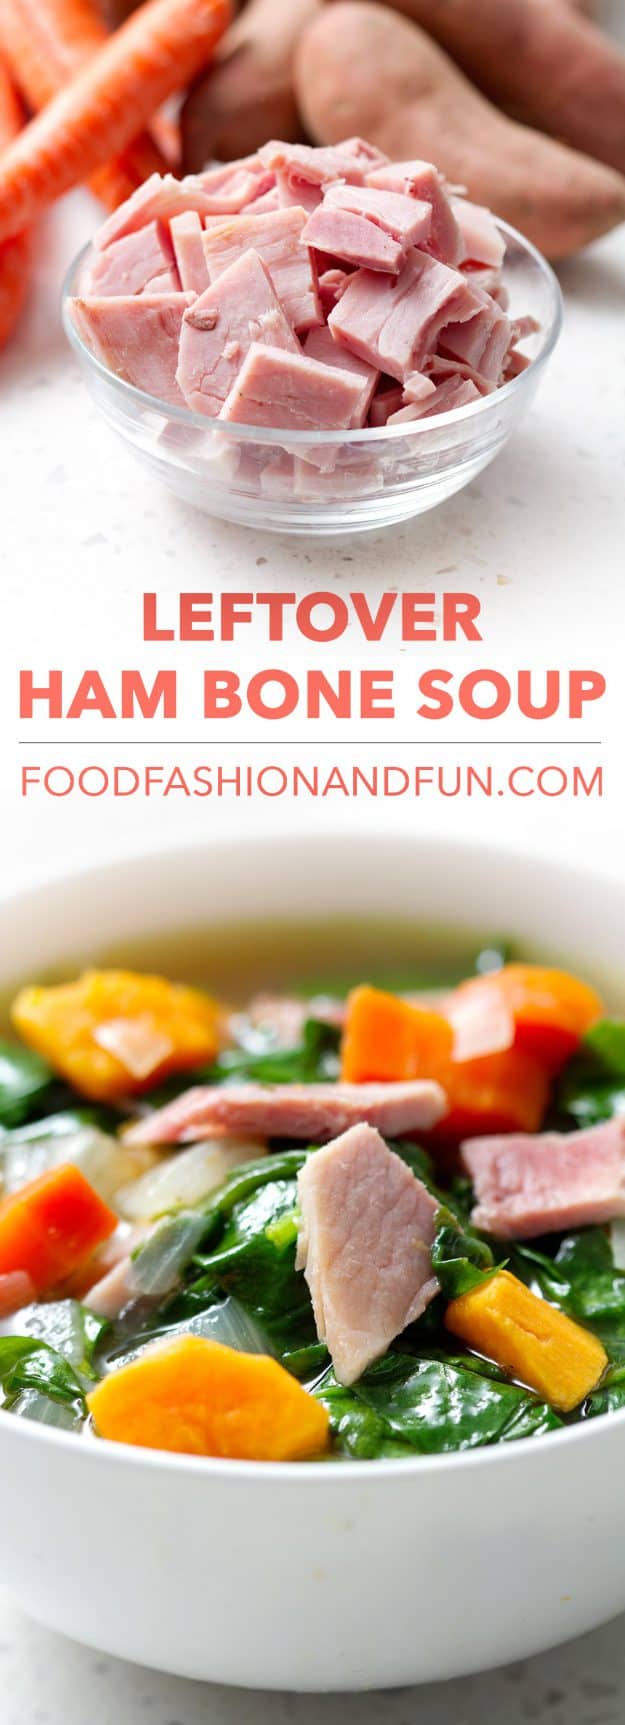 Save the bone and a few cups of leftover ham from last night’s glazed ham to make this Leftover Ham Bone Soup. It’s packed with colorful and good-for-you foods like carrots, sweet potatoes and spinach. This recipe is paleo/AIP that means gluten, dairy and nut free.